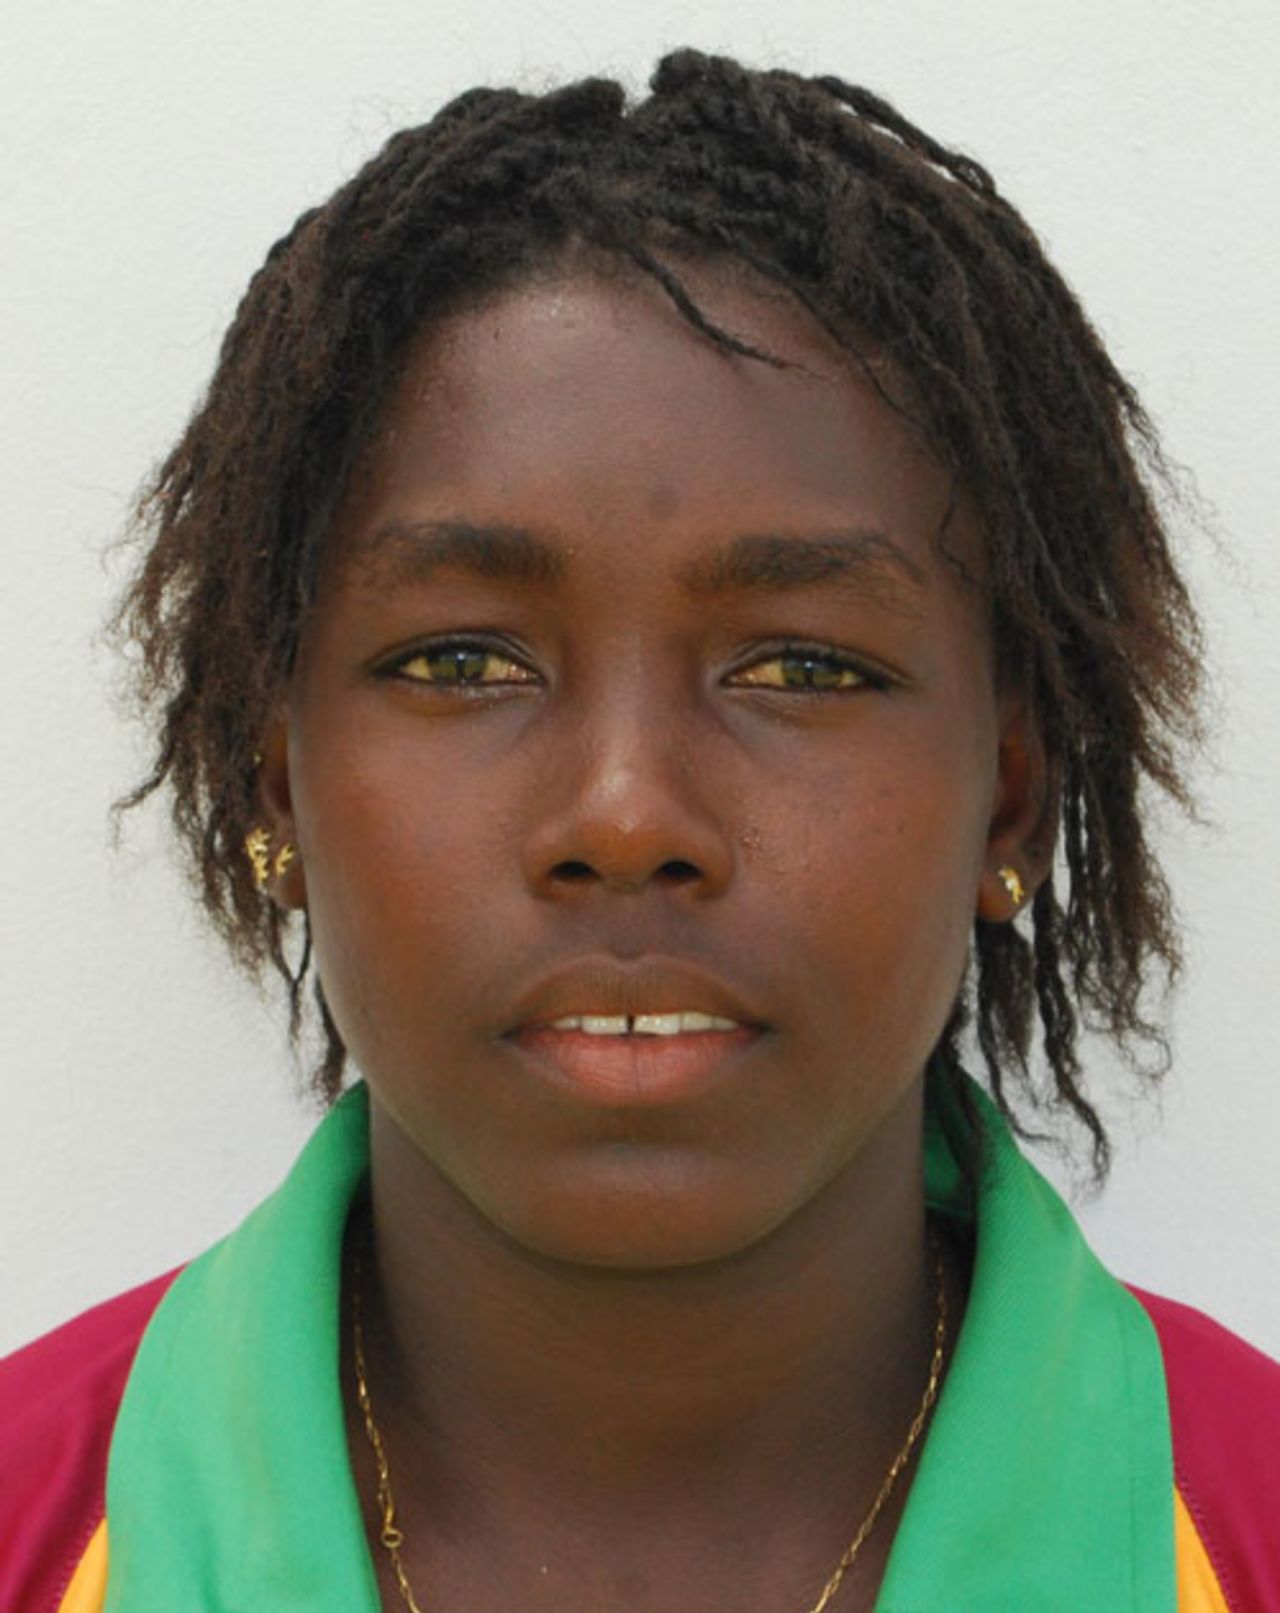 Shemaine Campbelle, player portrait